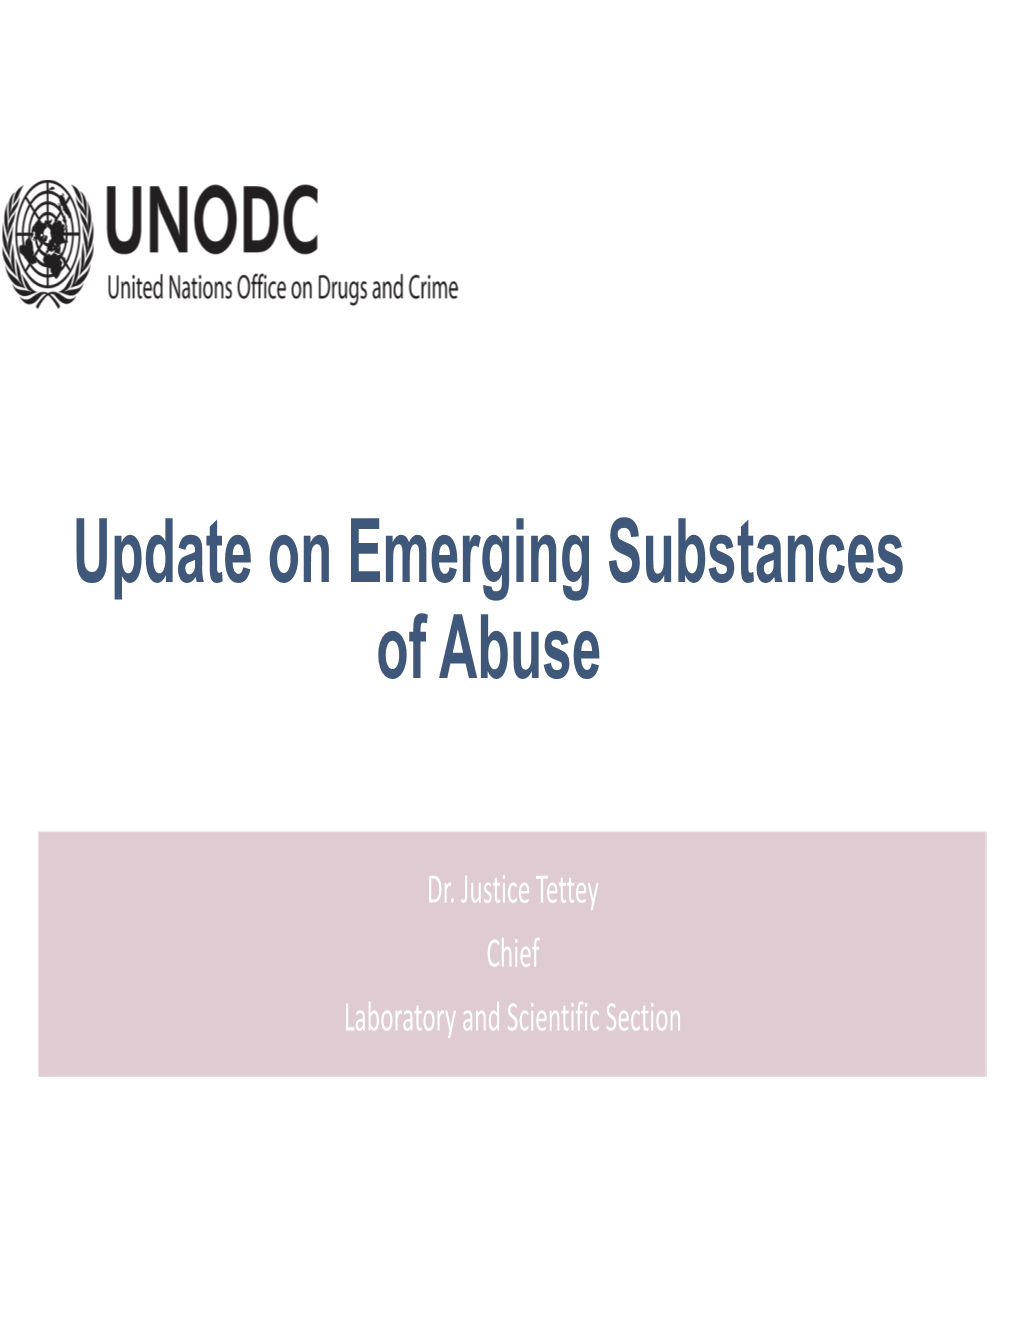 Update on Emerging Substances of Abuse